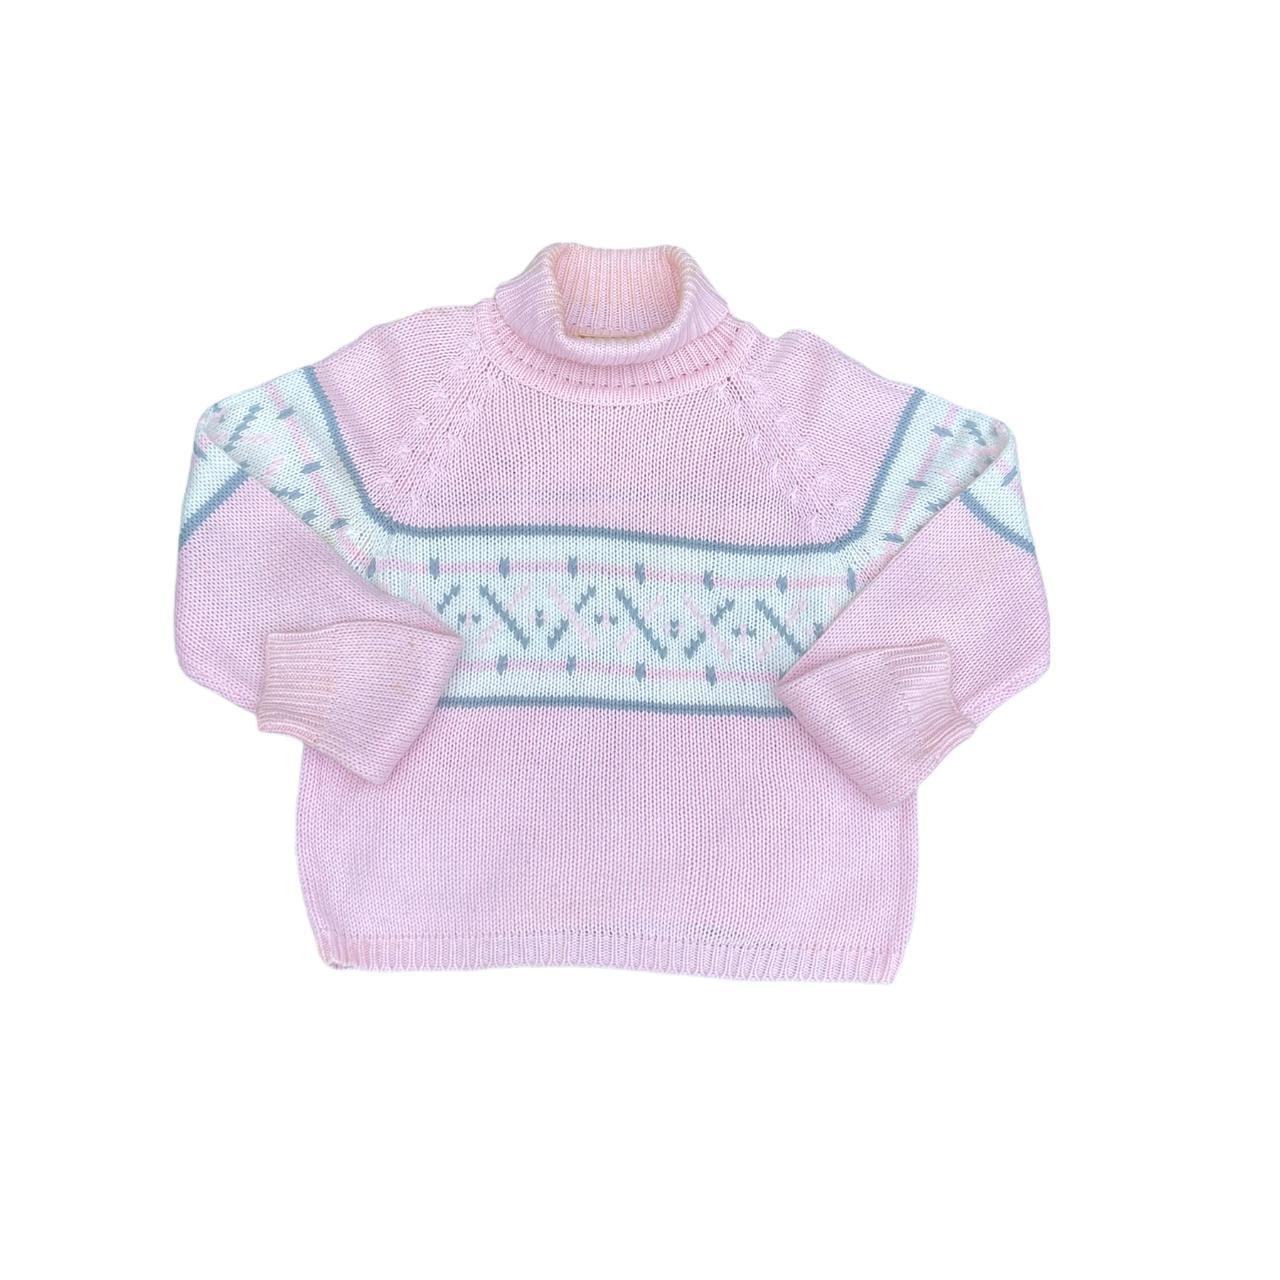 Product Image 2 - Cute Pink Turtleneck Sweater

Pink &